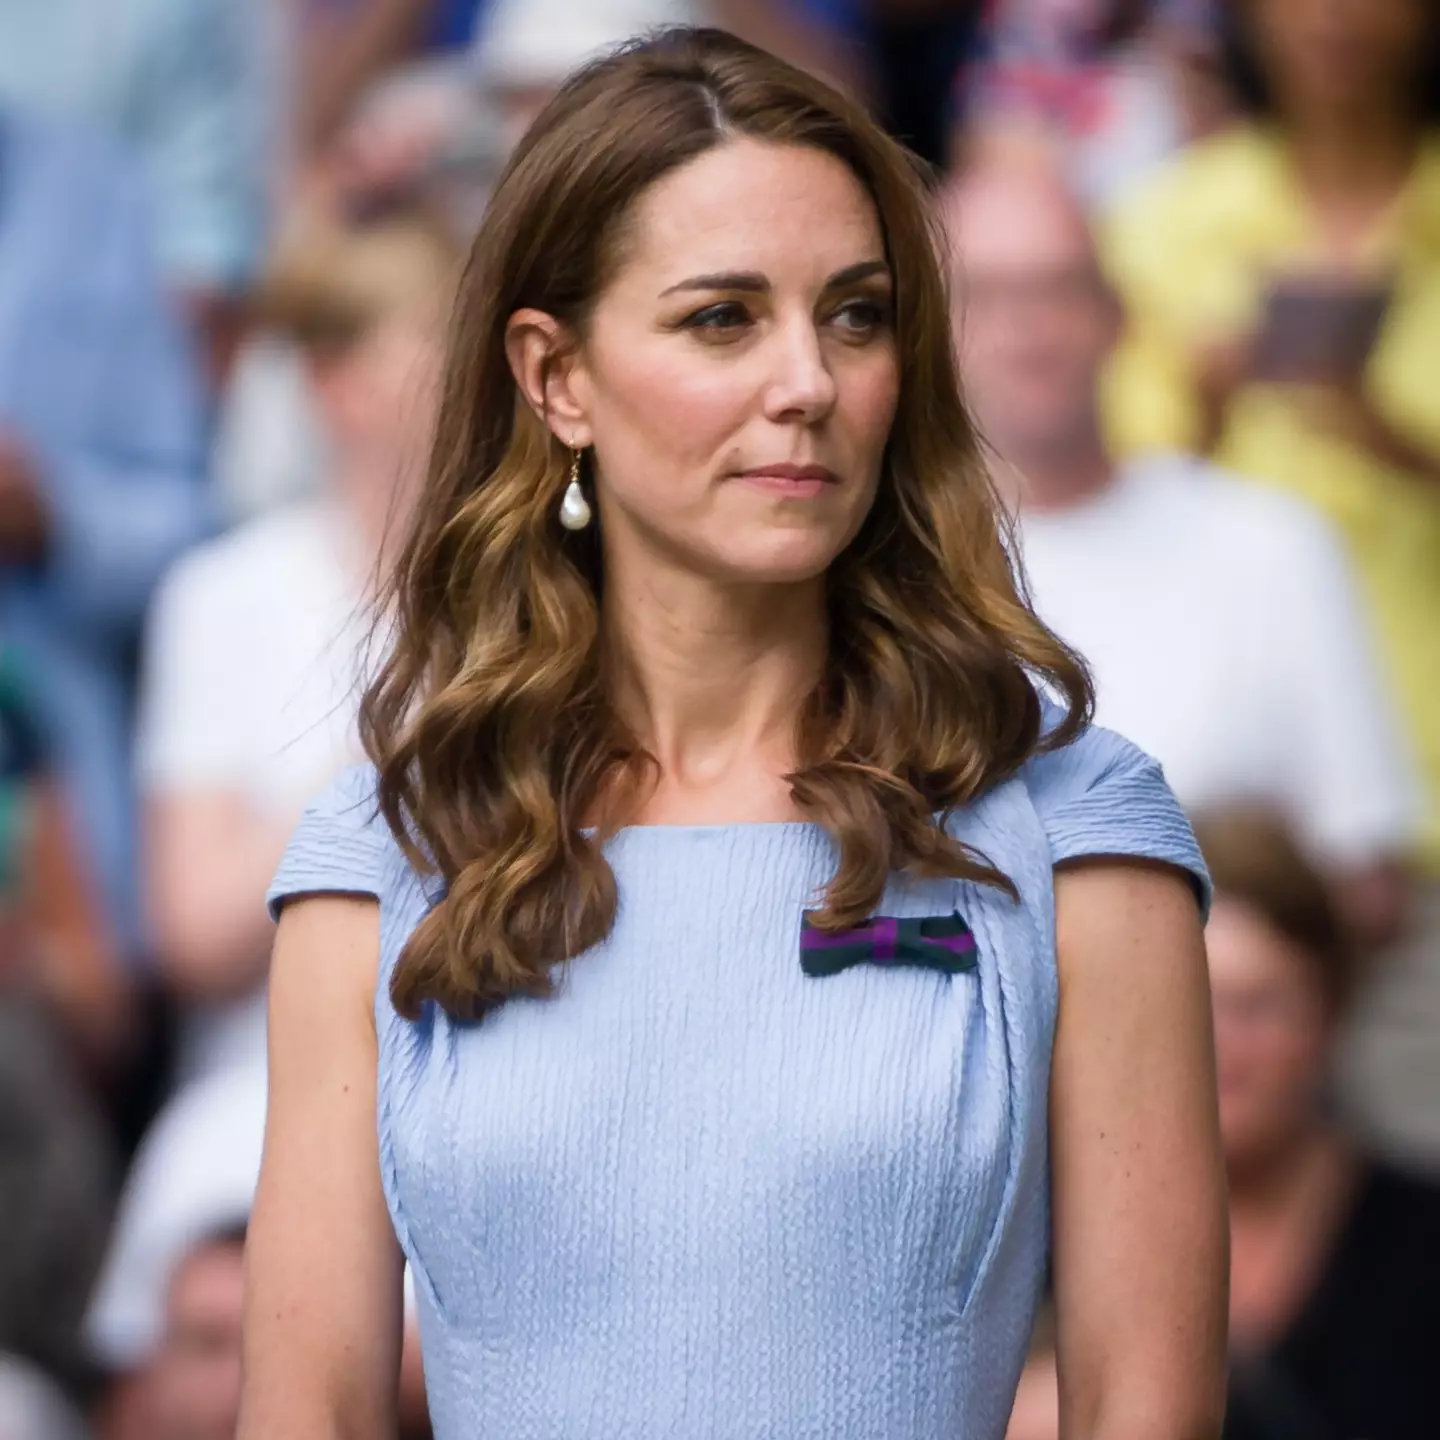 The internet has become littered with conspiracy theories regarding Kate Middleton's 'disappearance'.